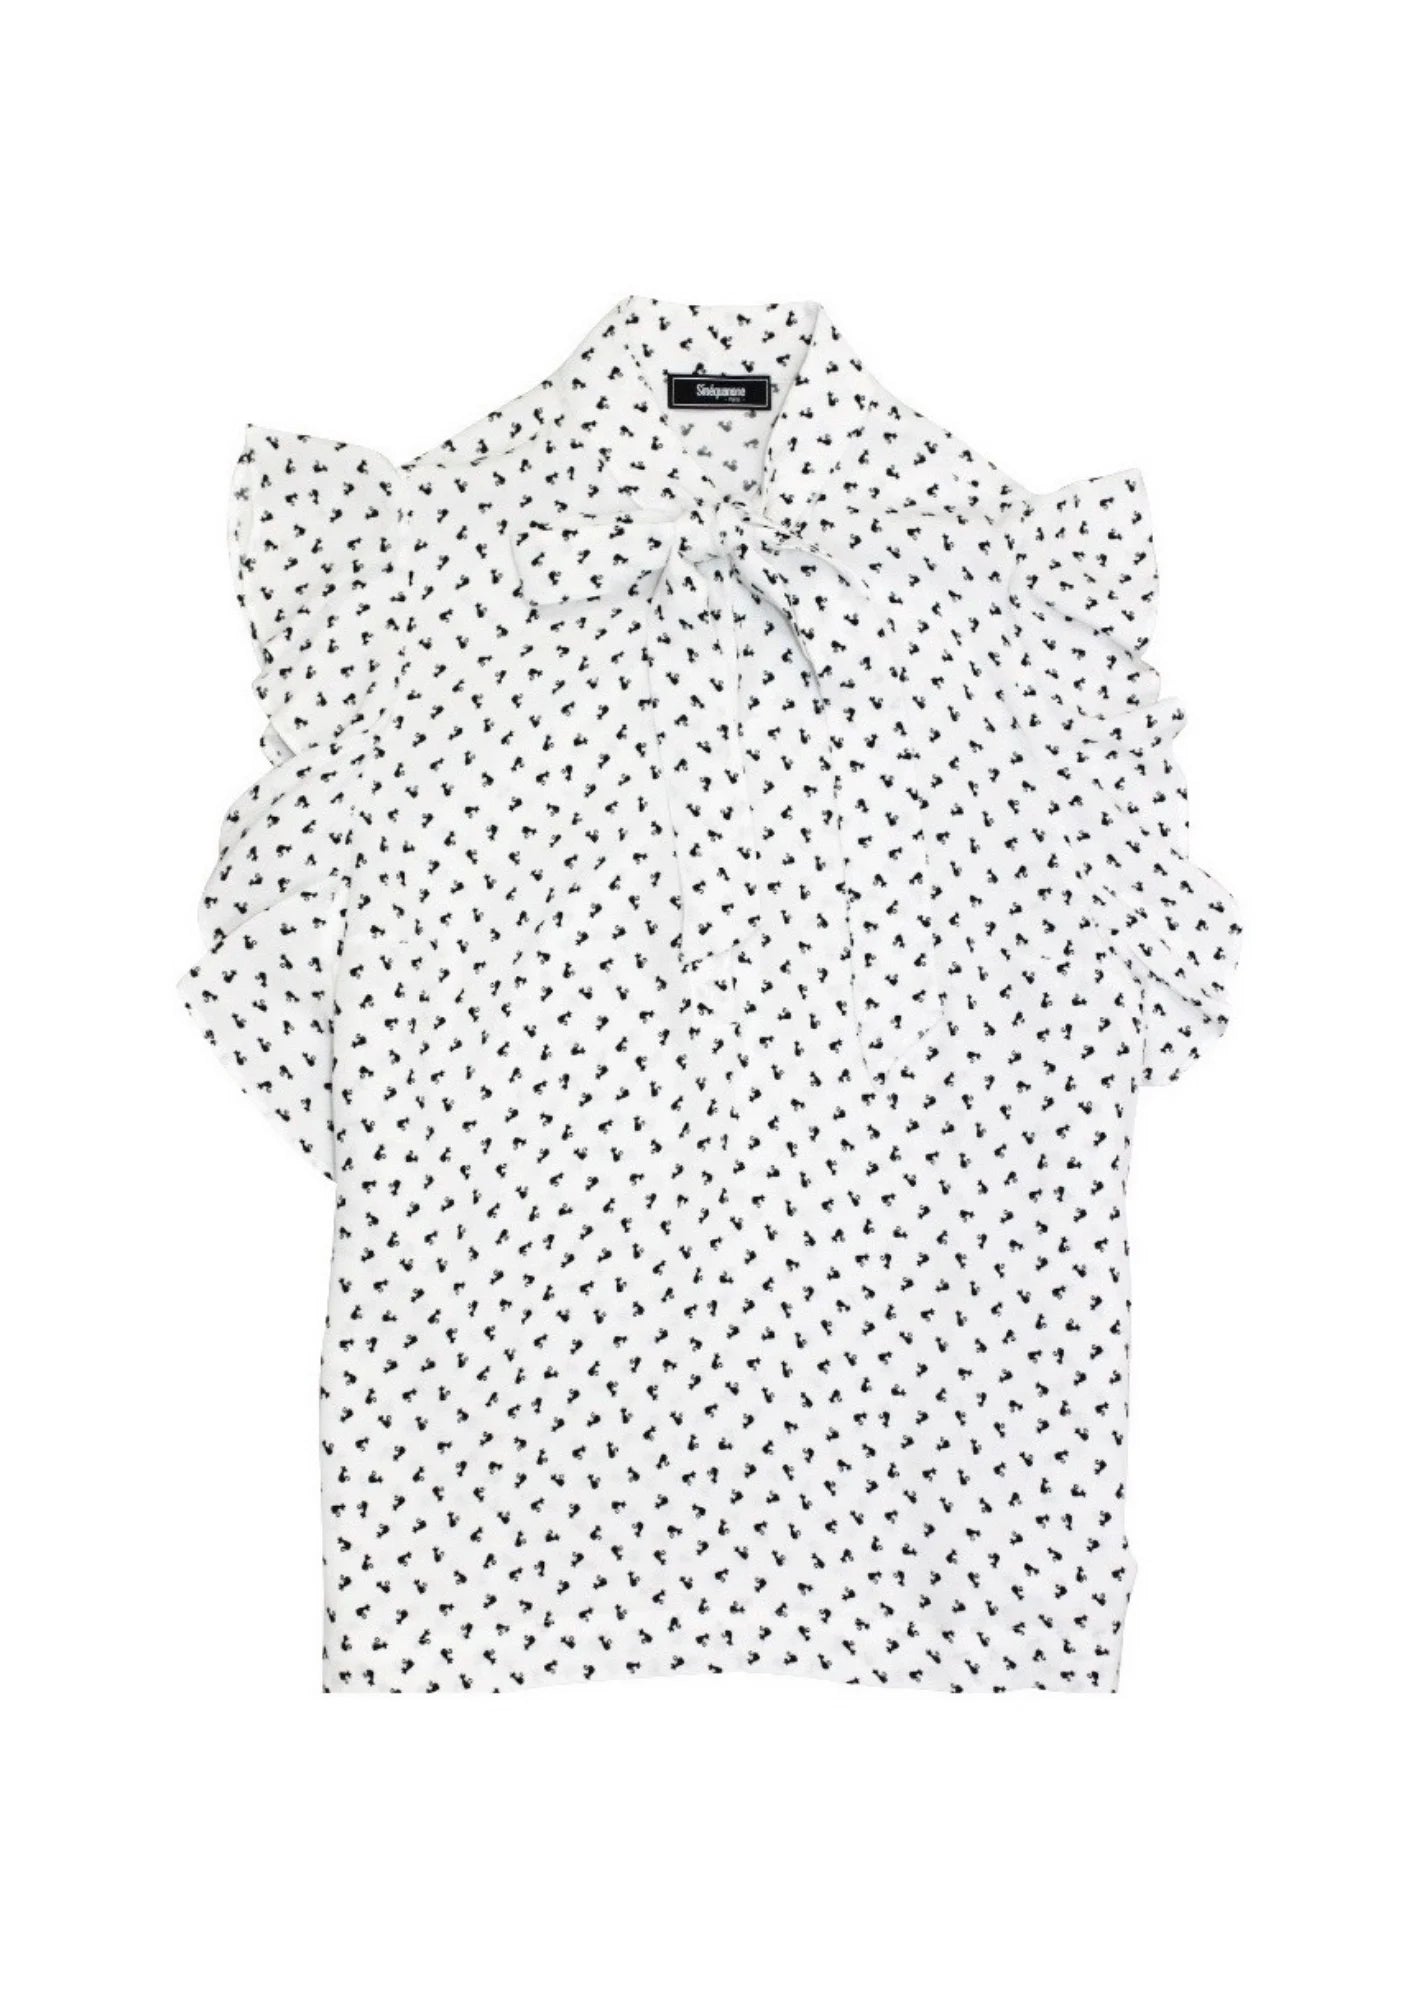 BLOUSE WITH SMALL CAT PRINT - WHITE AND BLACK